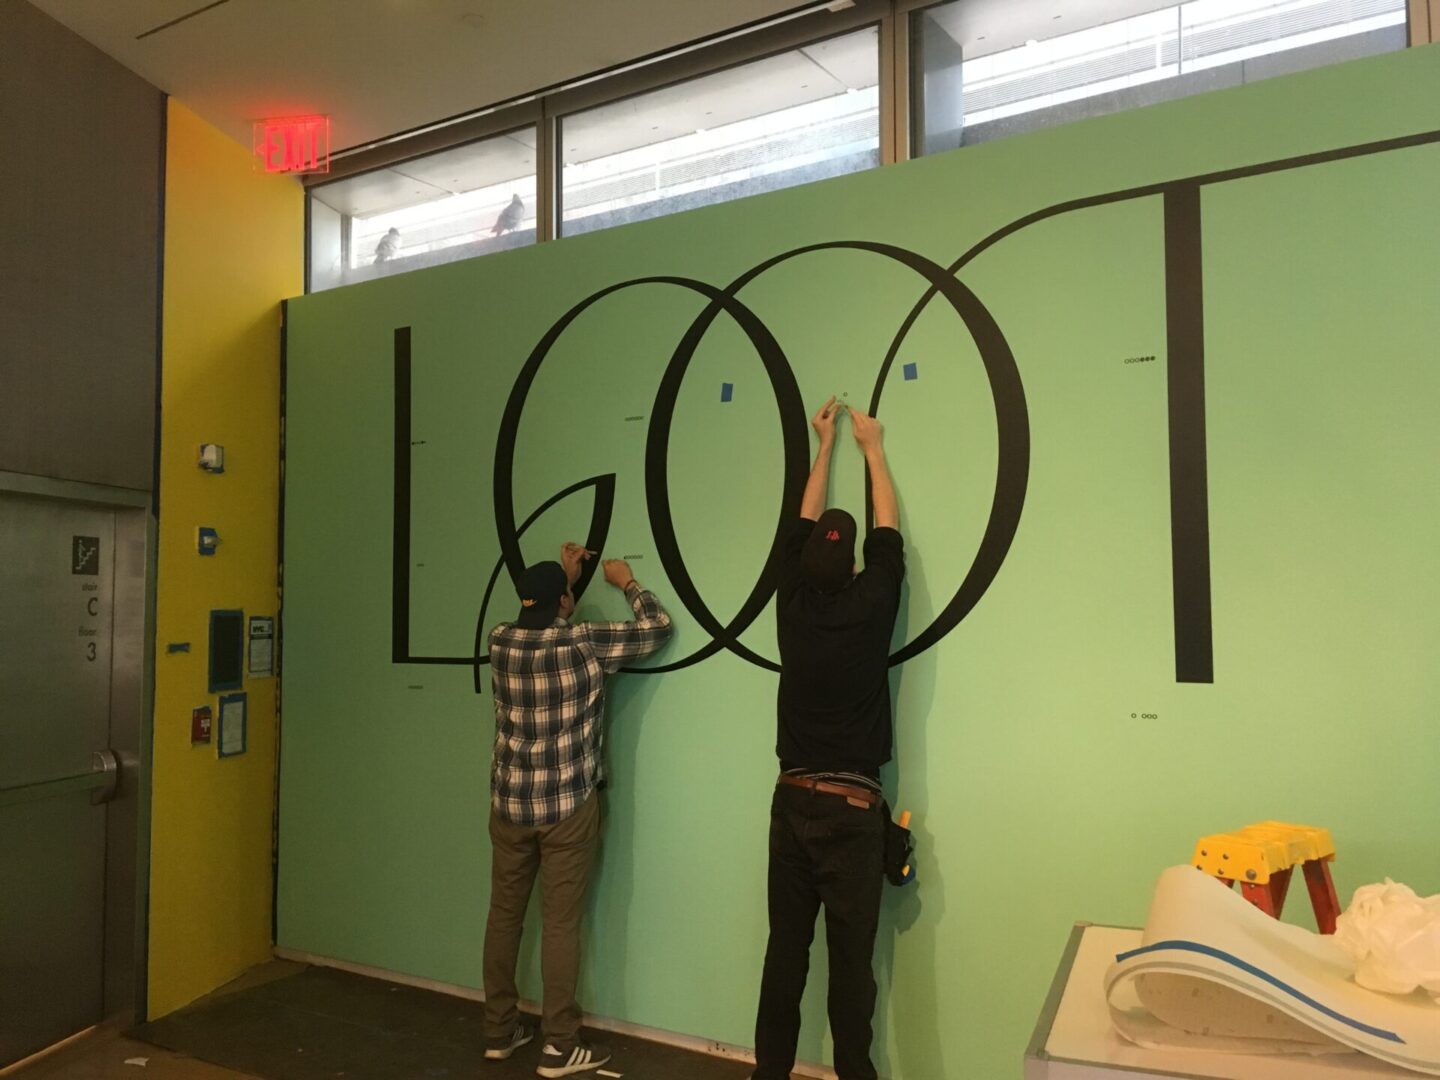 Two men are painting a wall with letters.